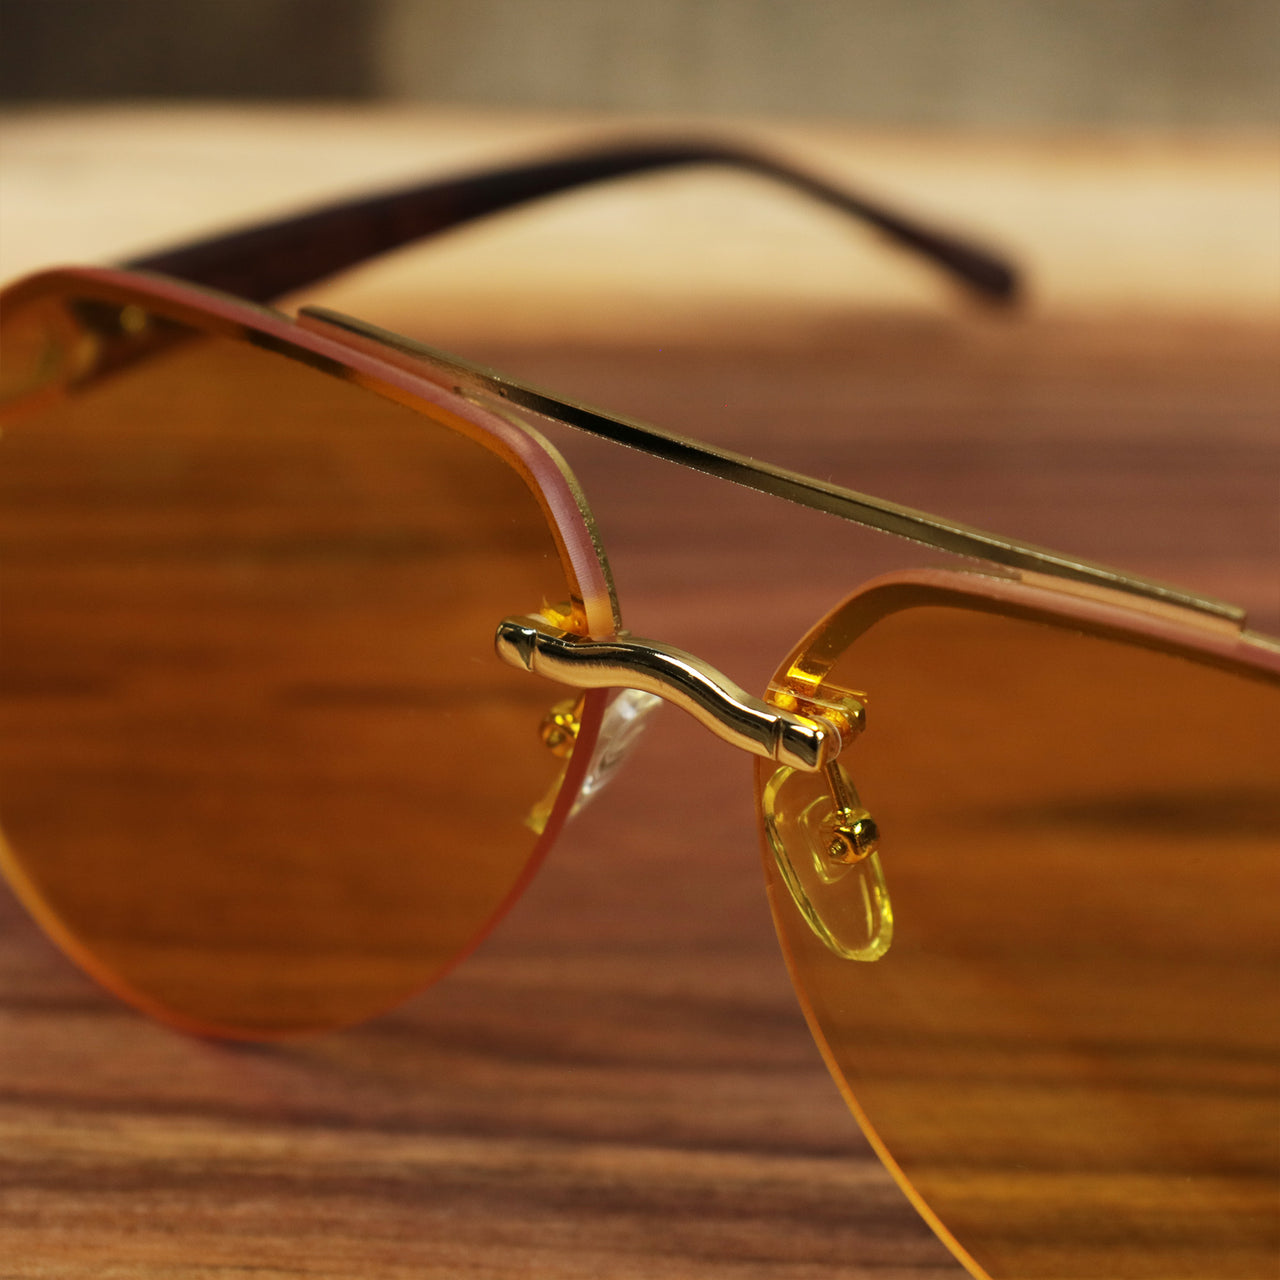 The bridge on the Round Aviator Frames Yellow Lens Sunglasses with Gold Frame